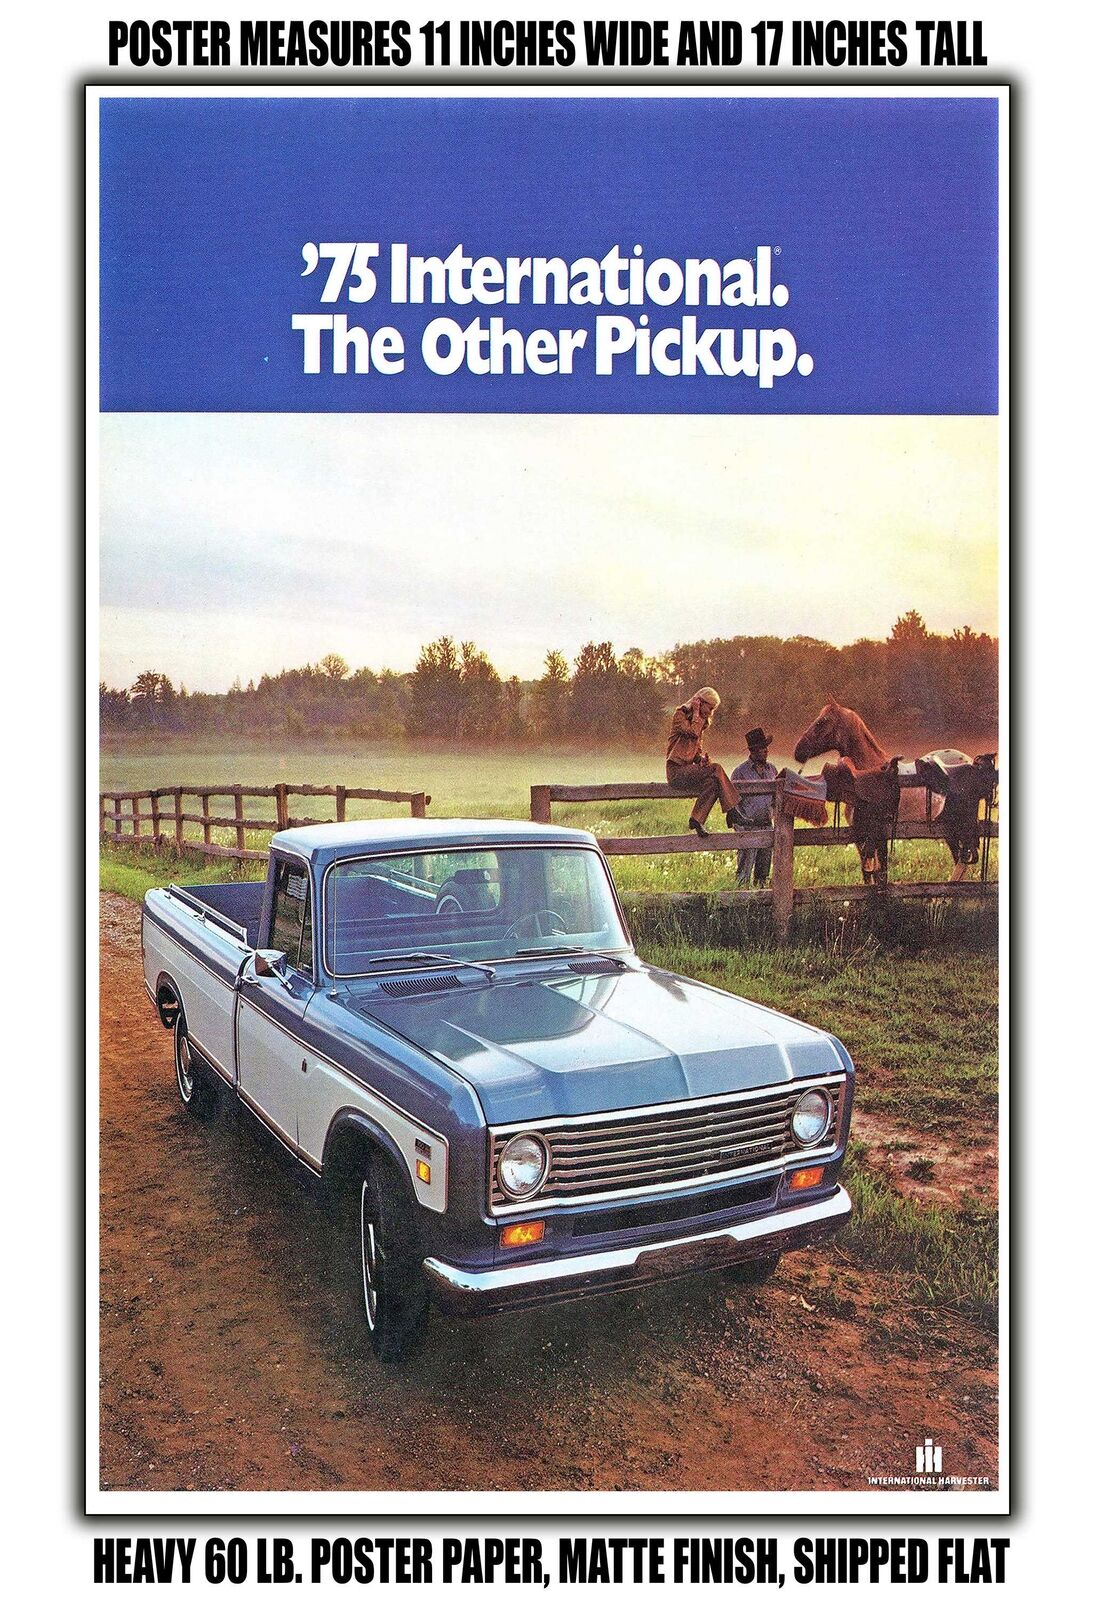 11x17 POSTER - 1975 International Pickup the Other Pickup